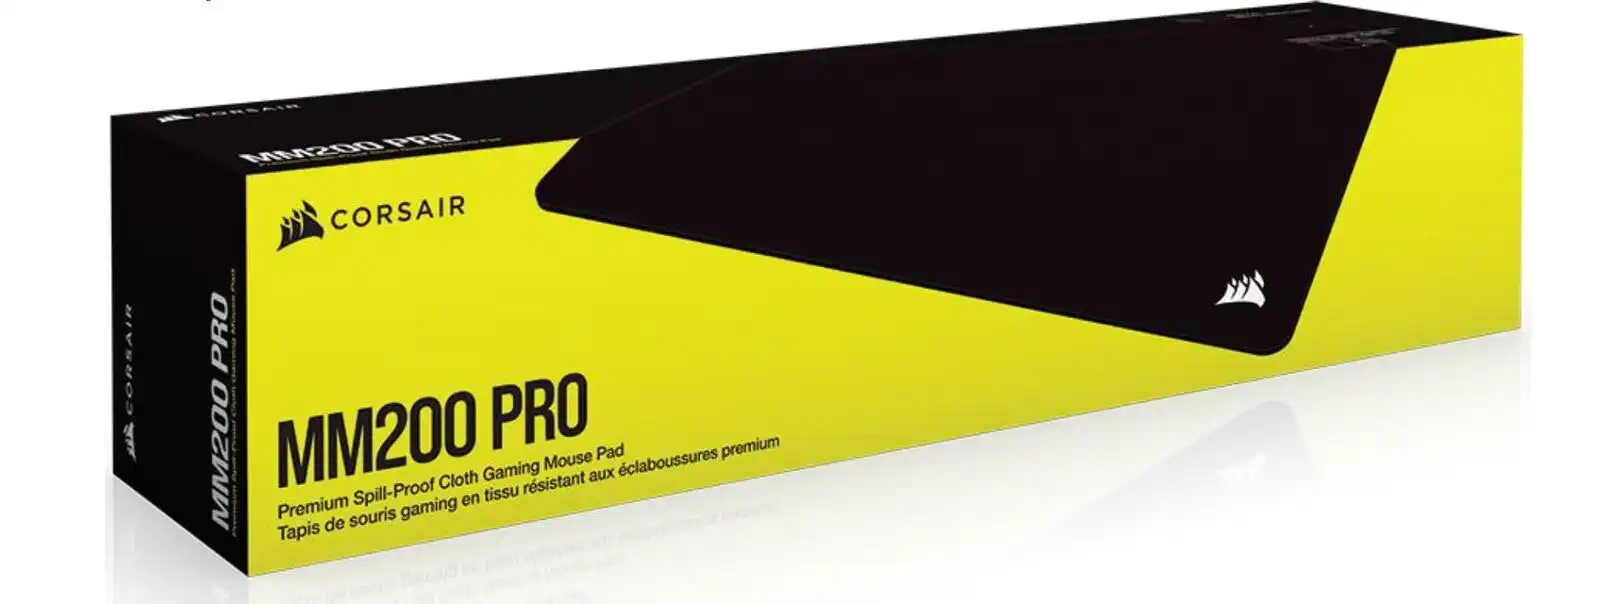 Corsair MM200 PRO Premium Non Slip Extended Gaming Mat Mouse Pad f/Keyboard/Mice